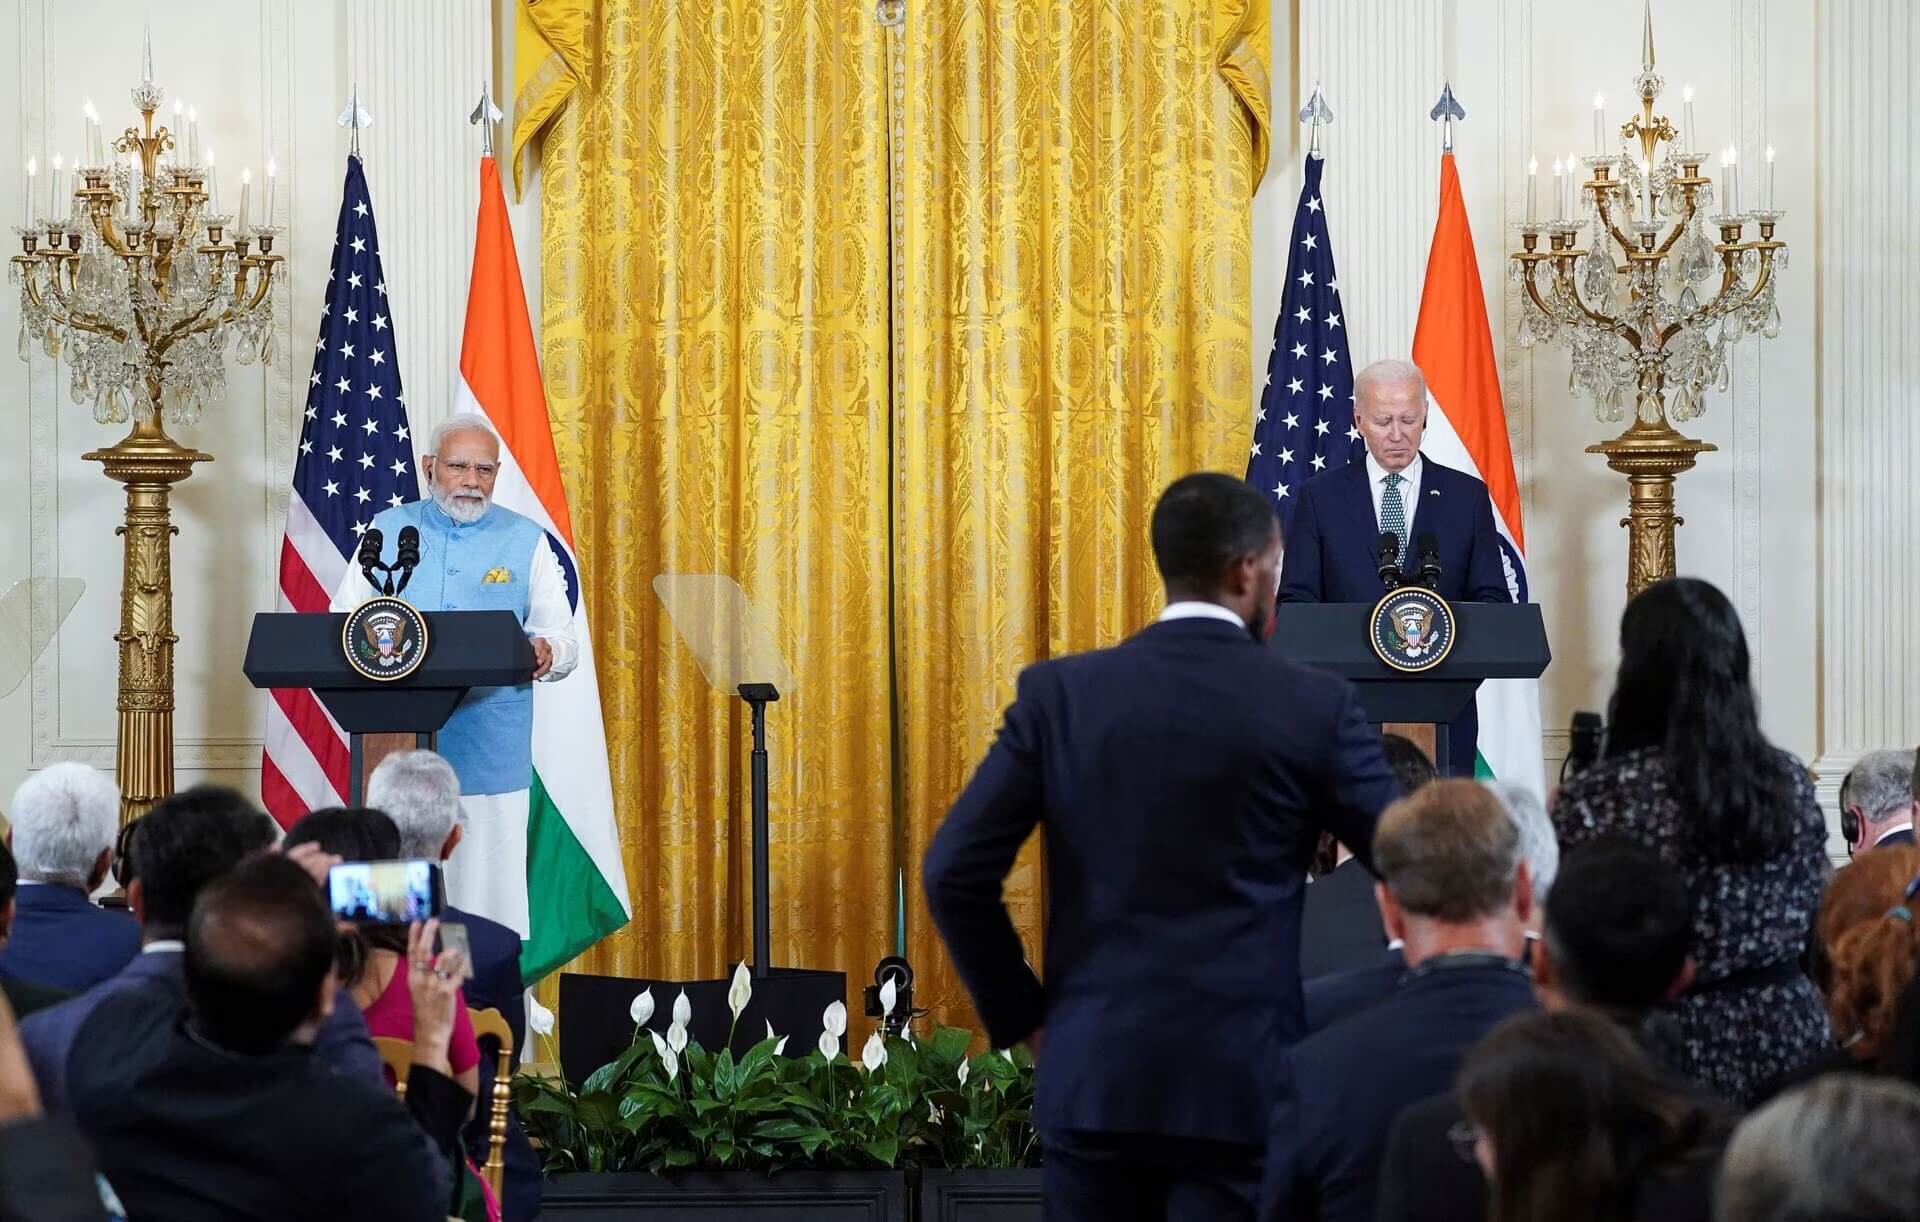 Democracy is in India’s DNA, No Space for Discrimination: PM Modi at White House Press Conference